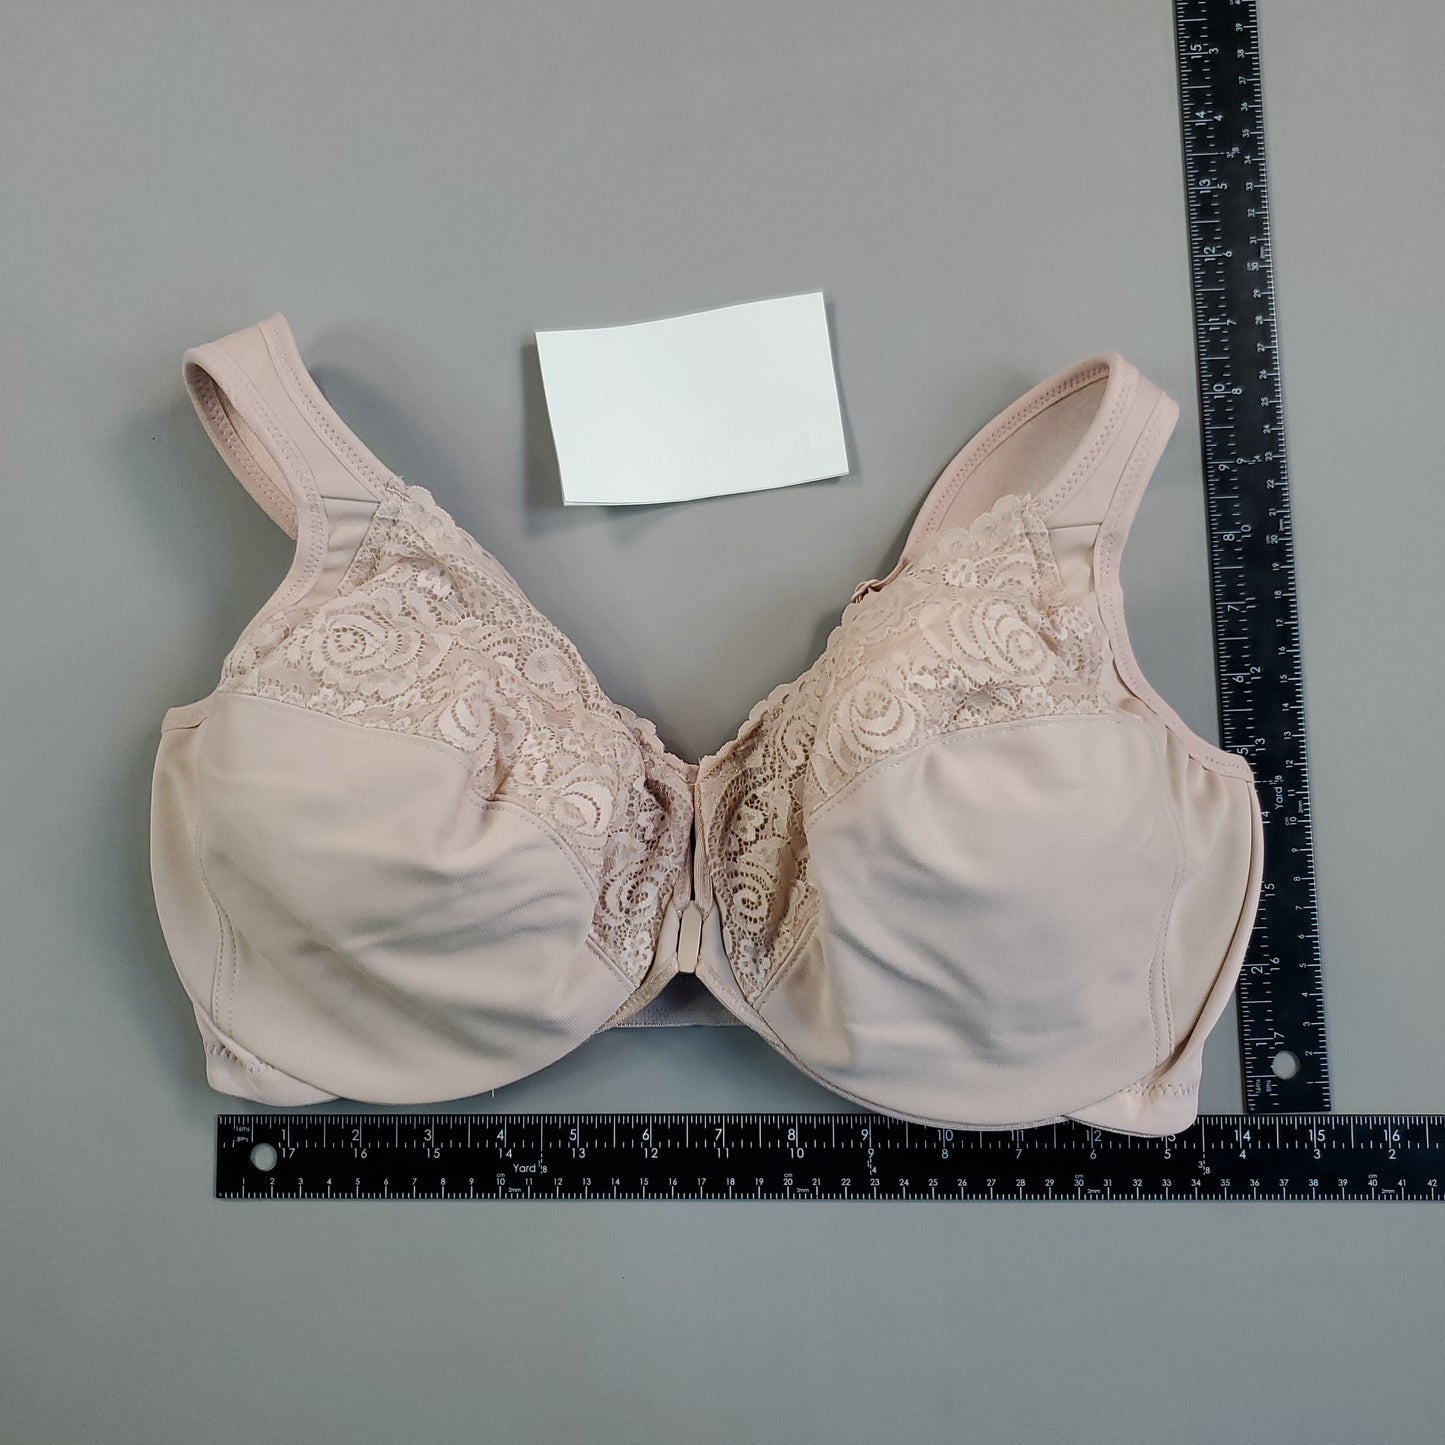 GLAMORISE Wire Support Bra Women's Sz 40 DD Nude Color (New Other)